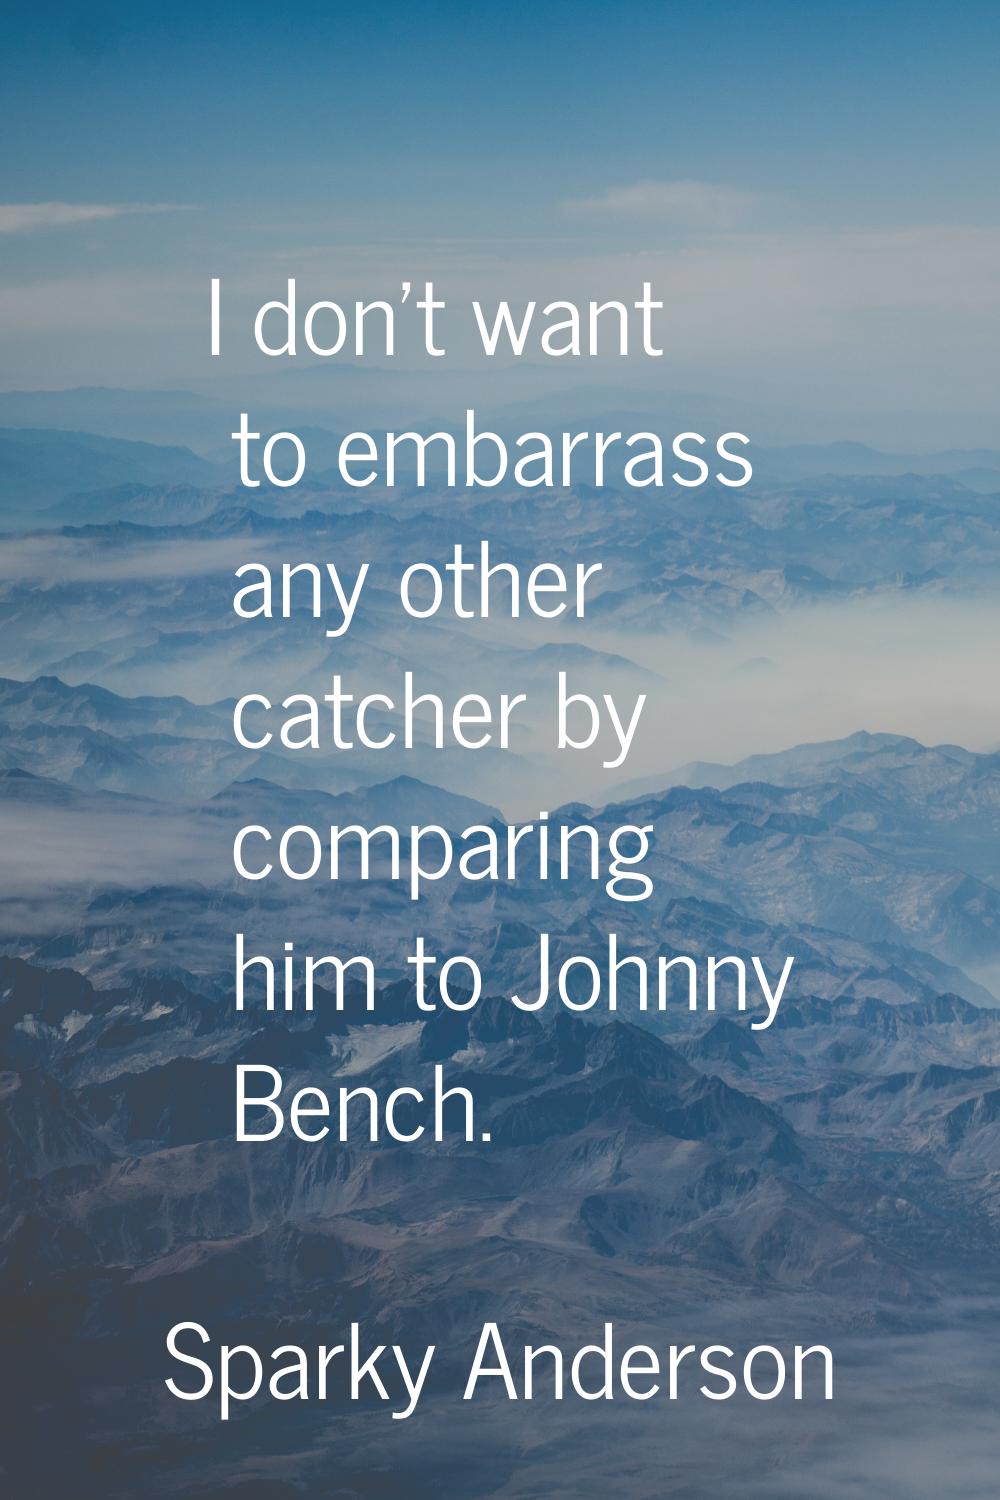 I don't want to embarrass any other catcher by comparing him to Johnny Bench.